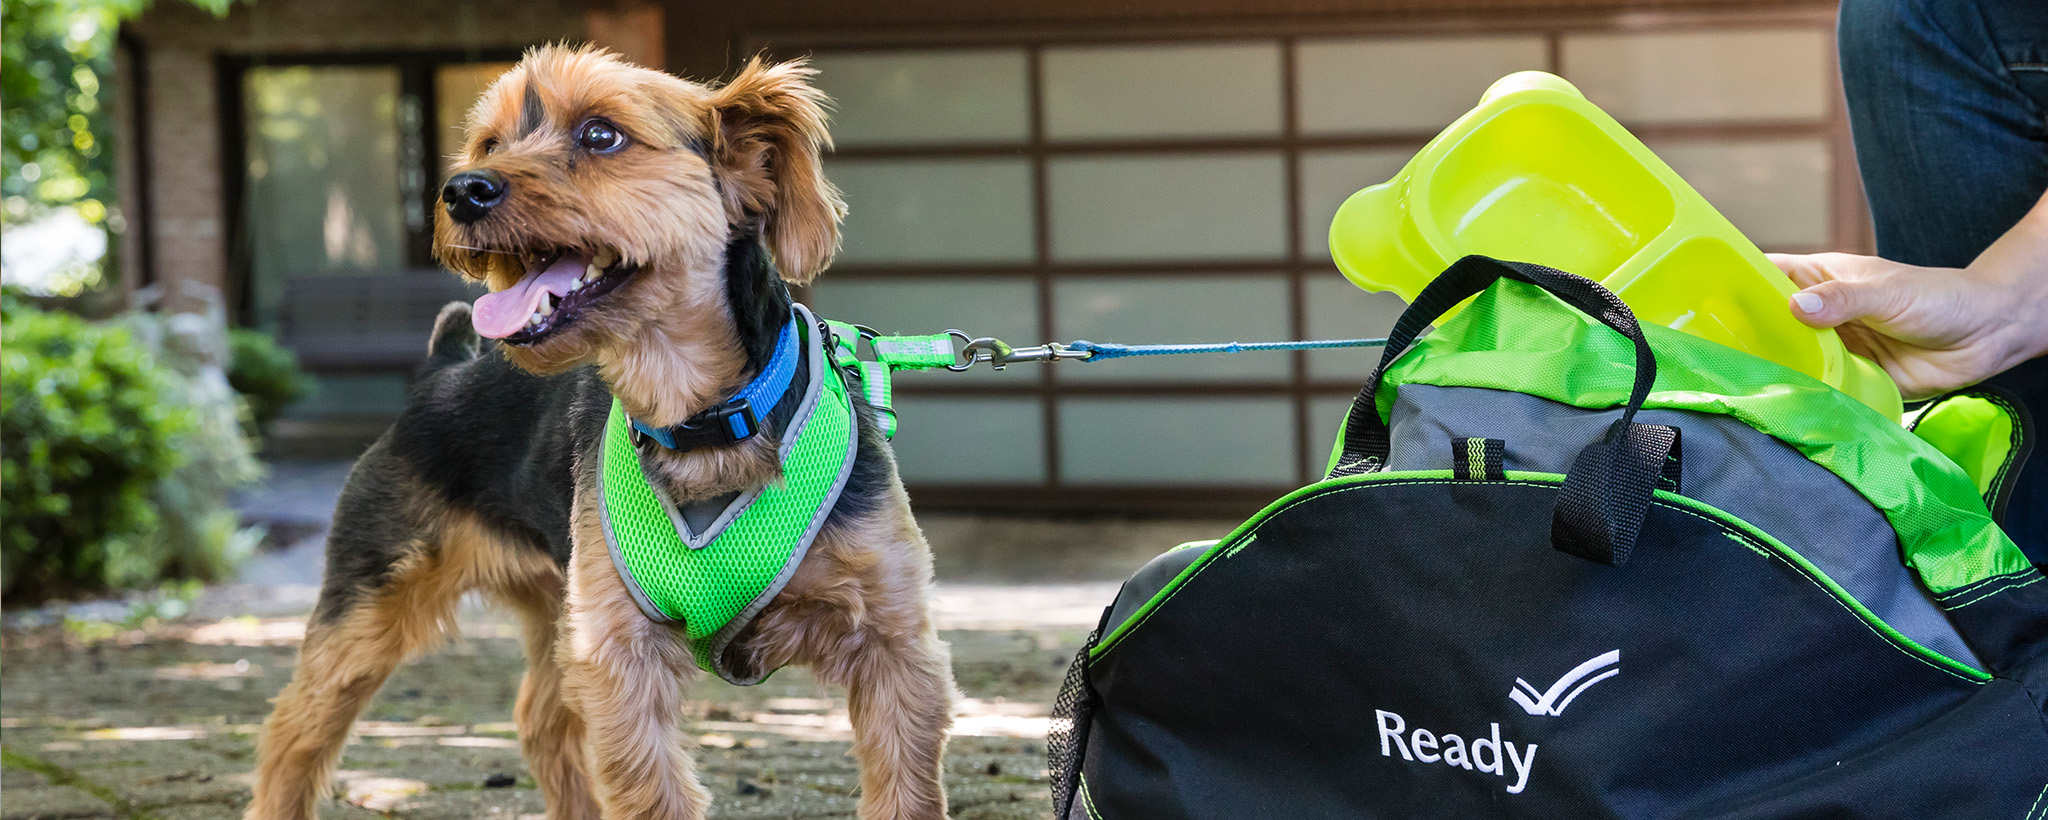 Prepare Your Pets for Disasters | Ready.gov